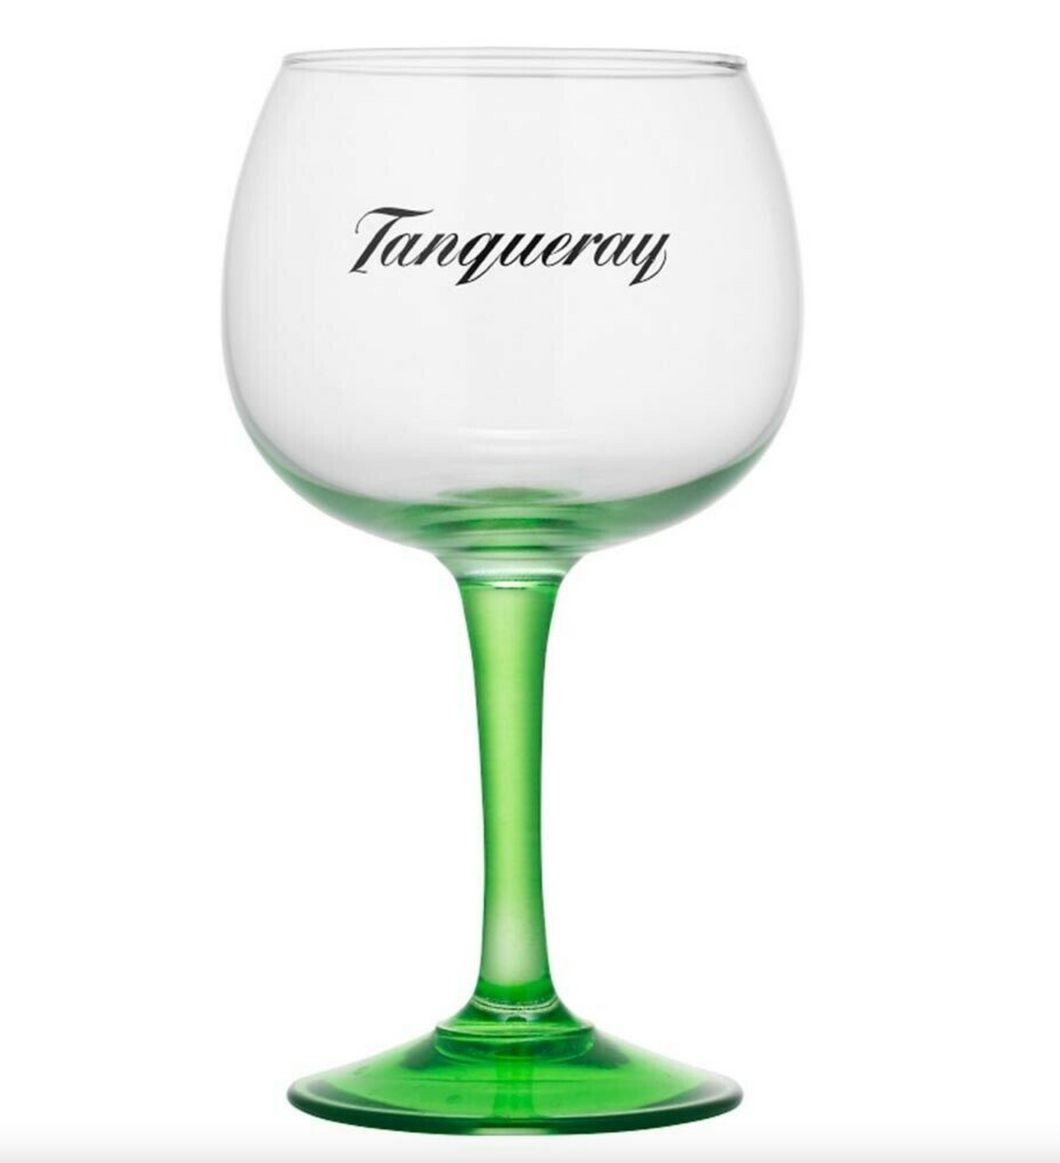 TANQUERAY LARGE GIN BALLOON GLASS